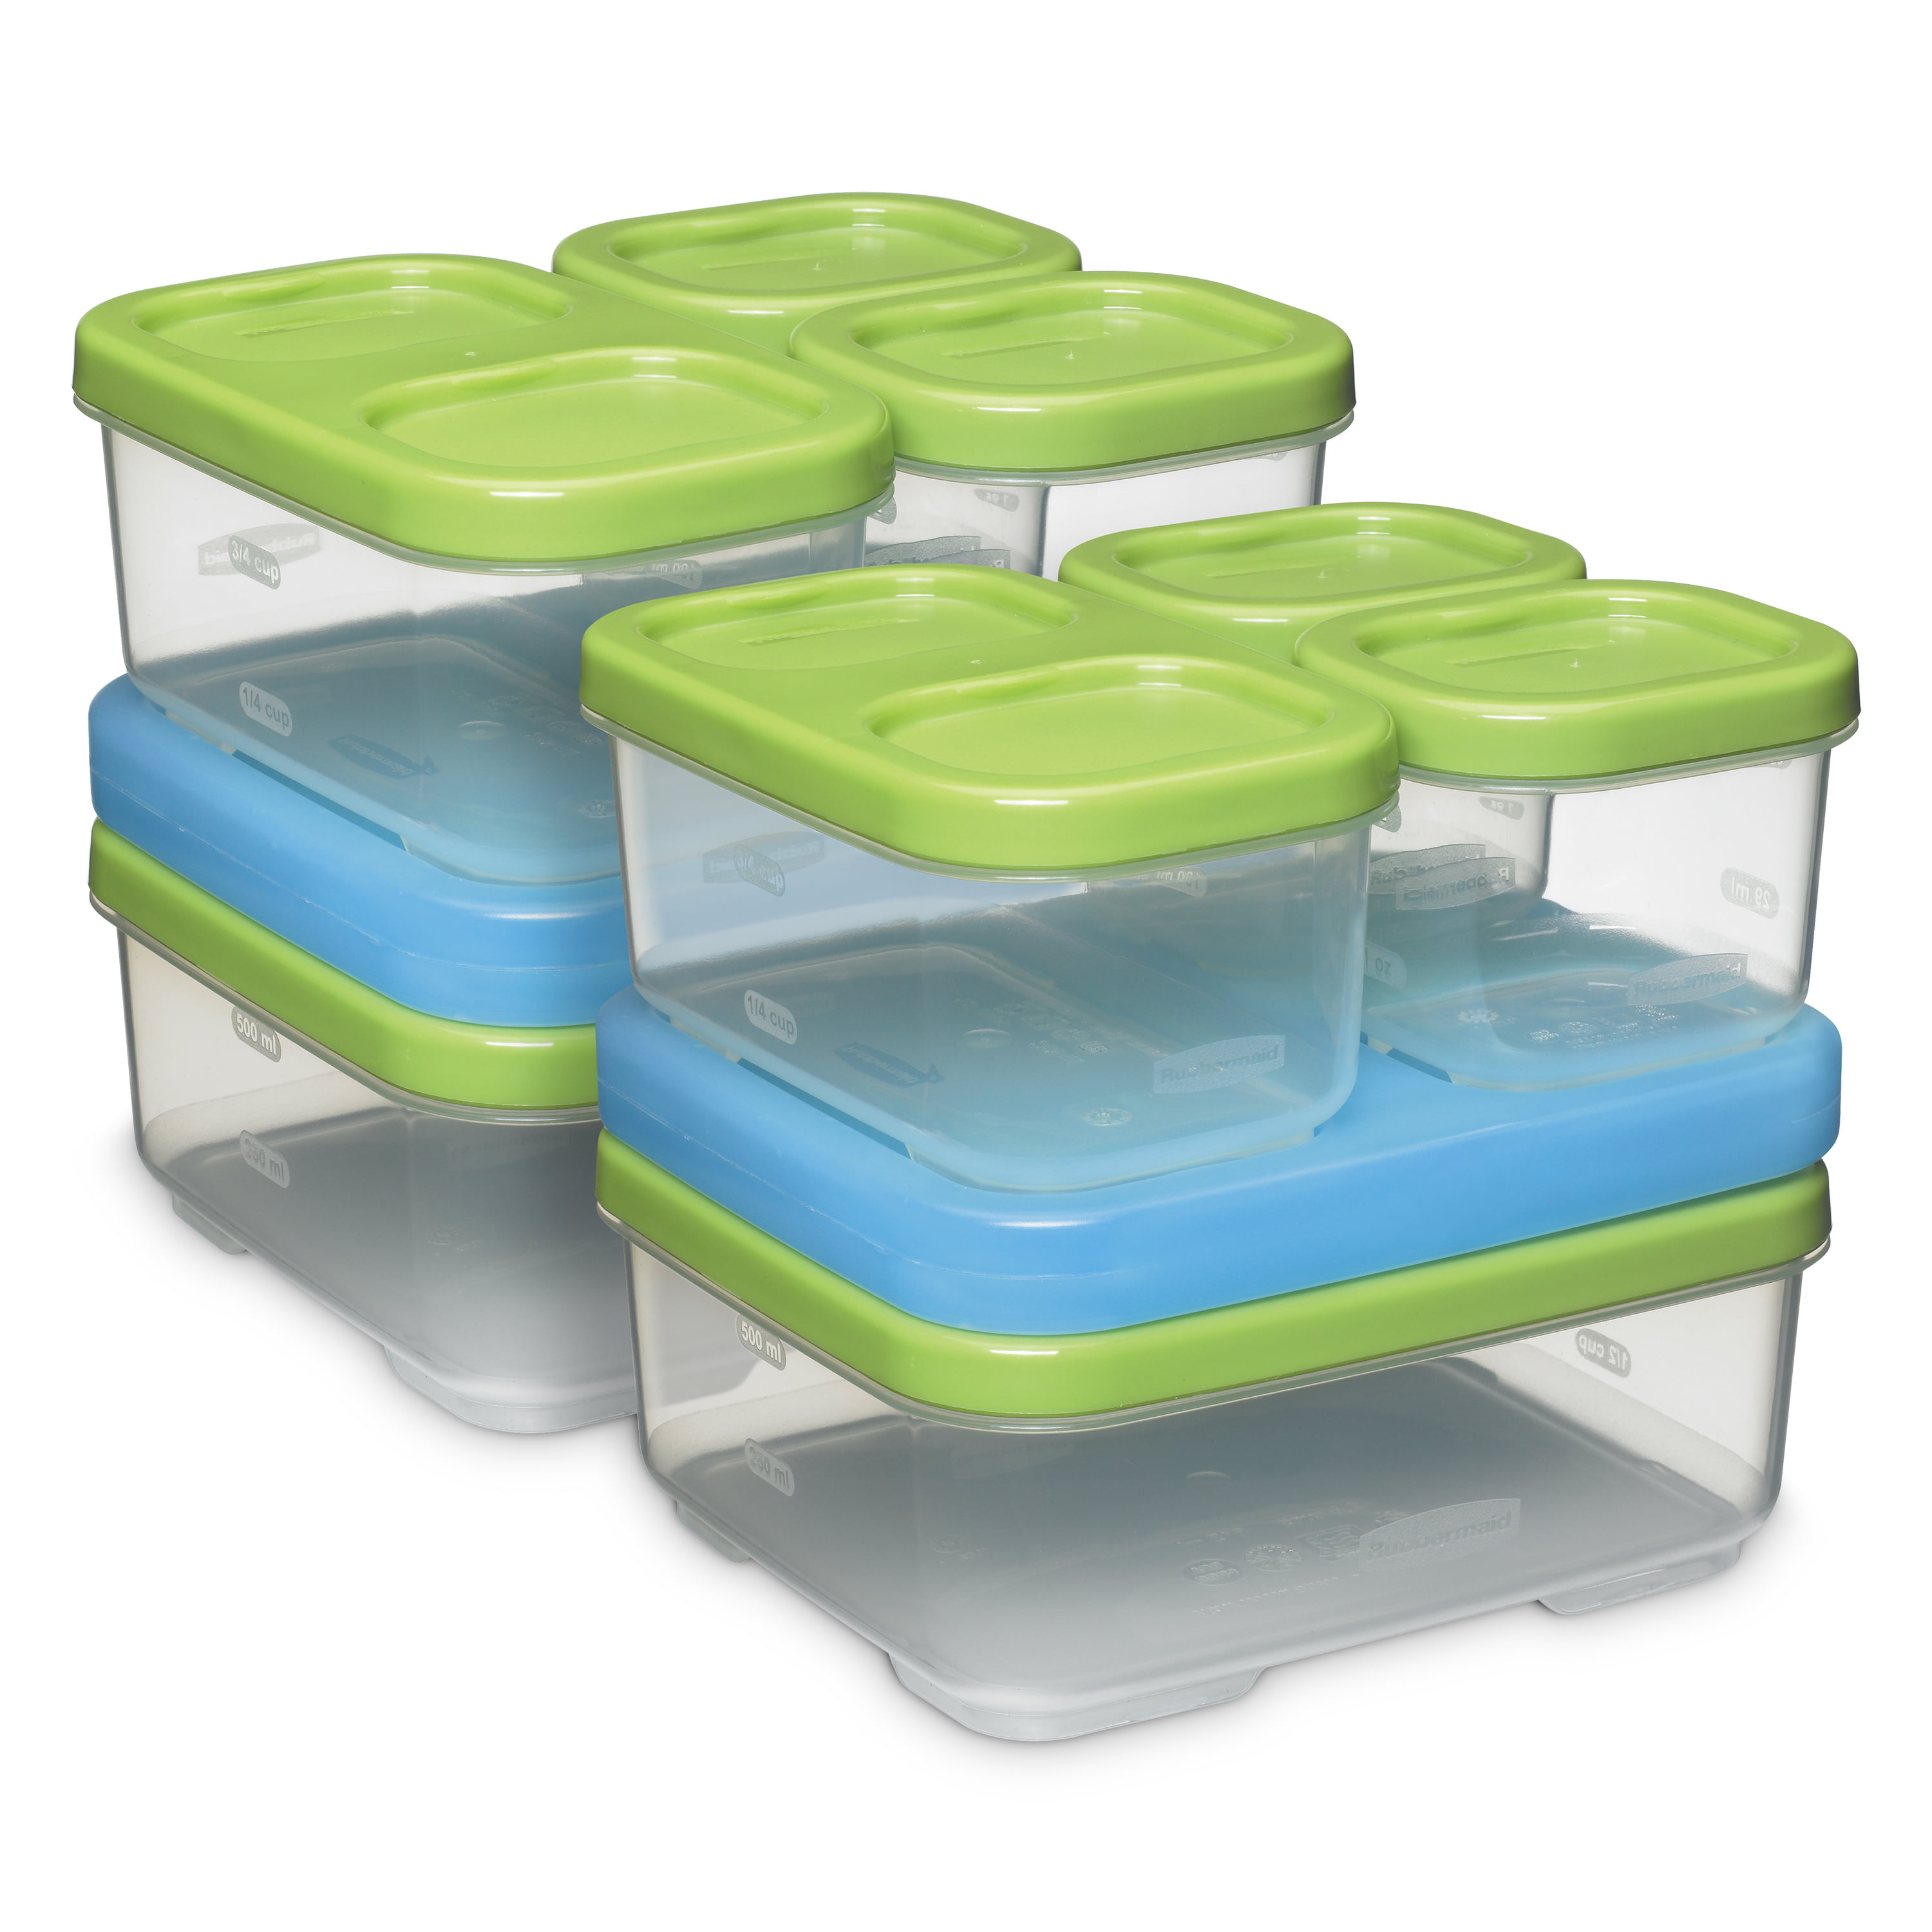 Tupperware Brands Sandwich Keepers Set of Two Teal Green and Aqua Blue Brand New